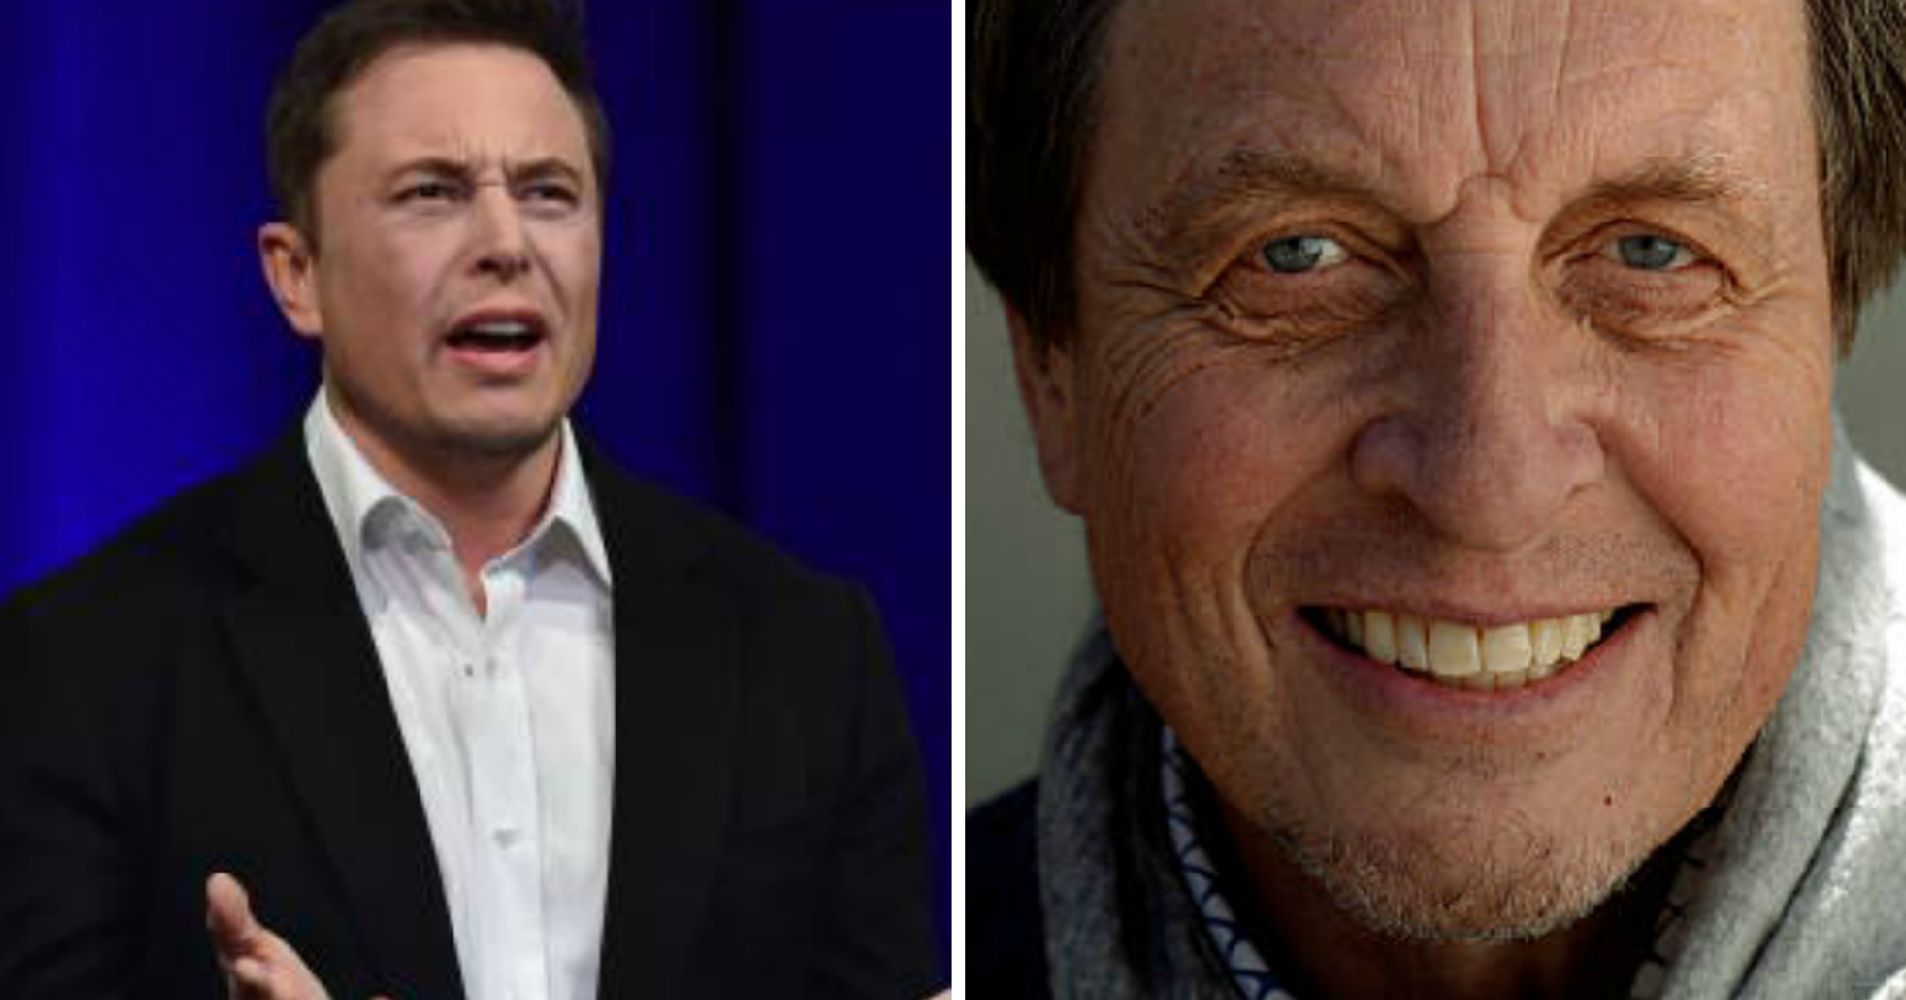 Elon Musk's Estranged Father Has Child With Stepdaughter, Says It's 'God's Plan'